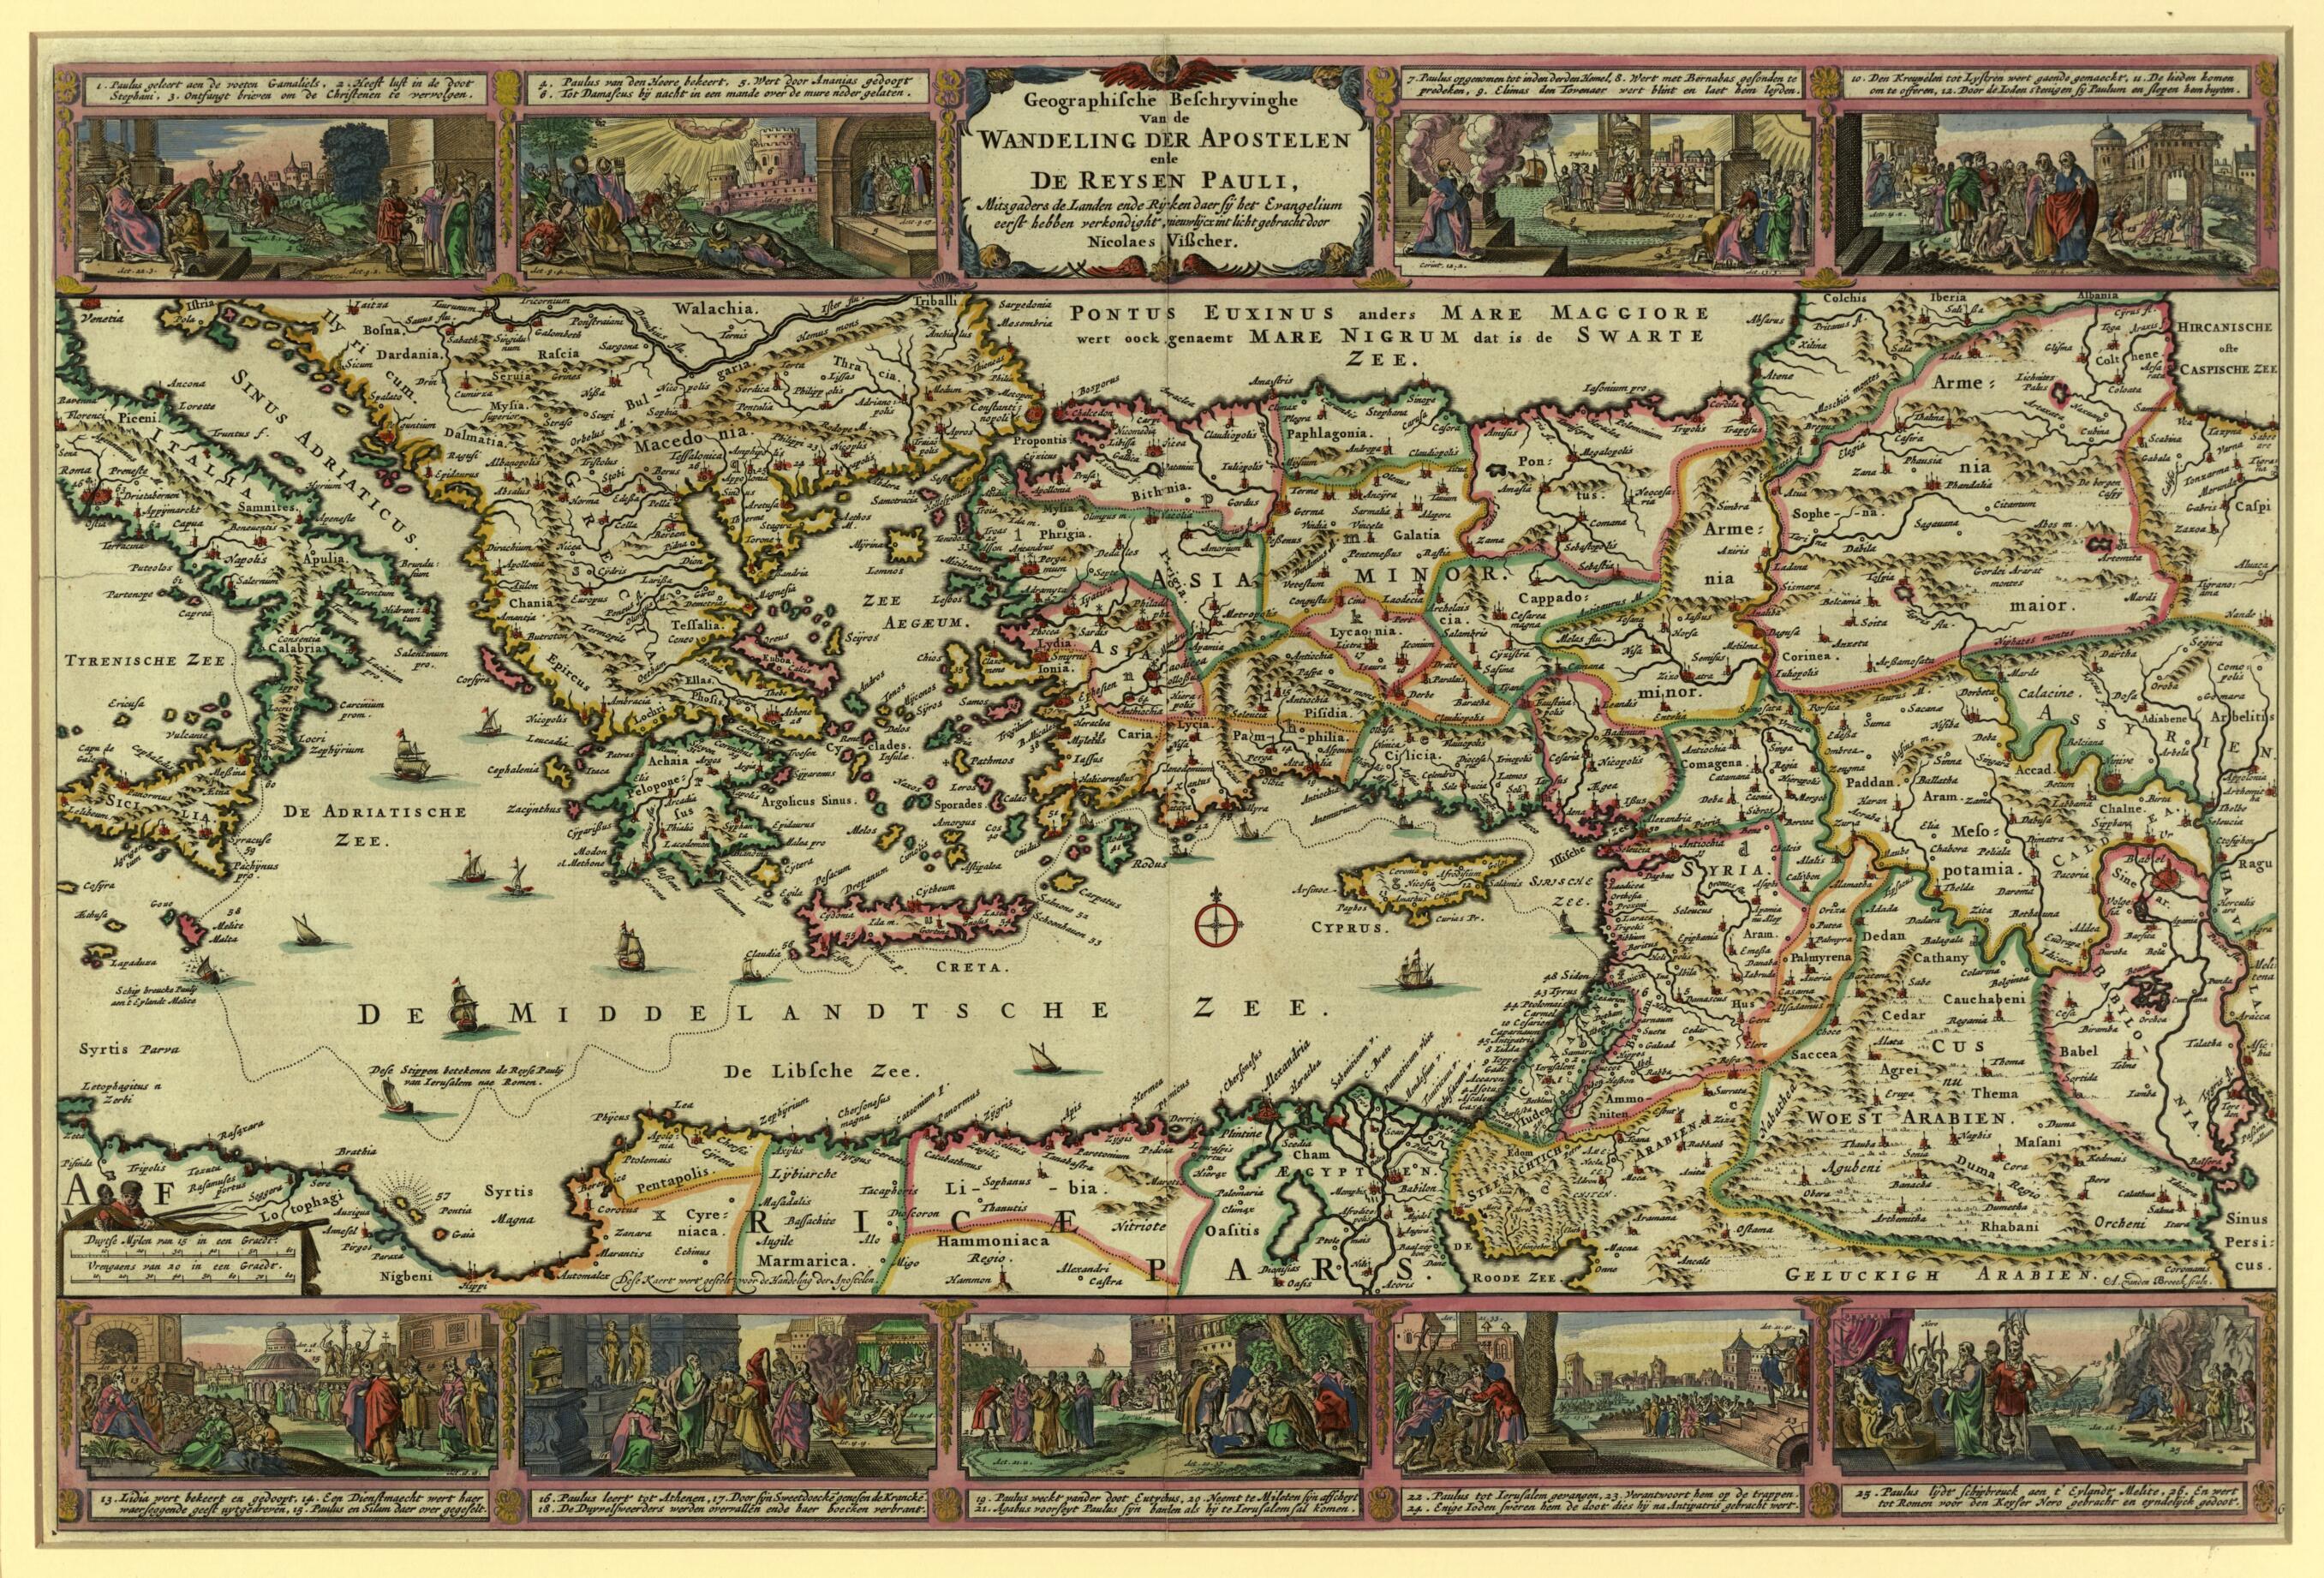 This old map of Geographic Description of the Travels of the Apostles and the Journeys of Paul, Together With the Countries and Empires Where They First Preached the Gospel. (Geographische Beschryvinghe Van De Wandeling Der Apostelen Ende De Reysen Pauli